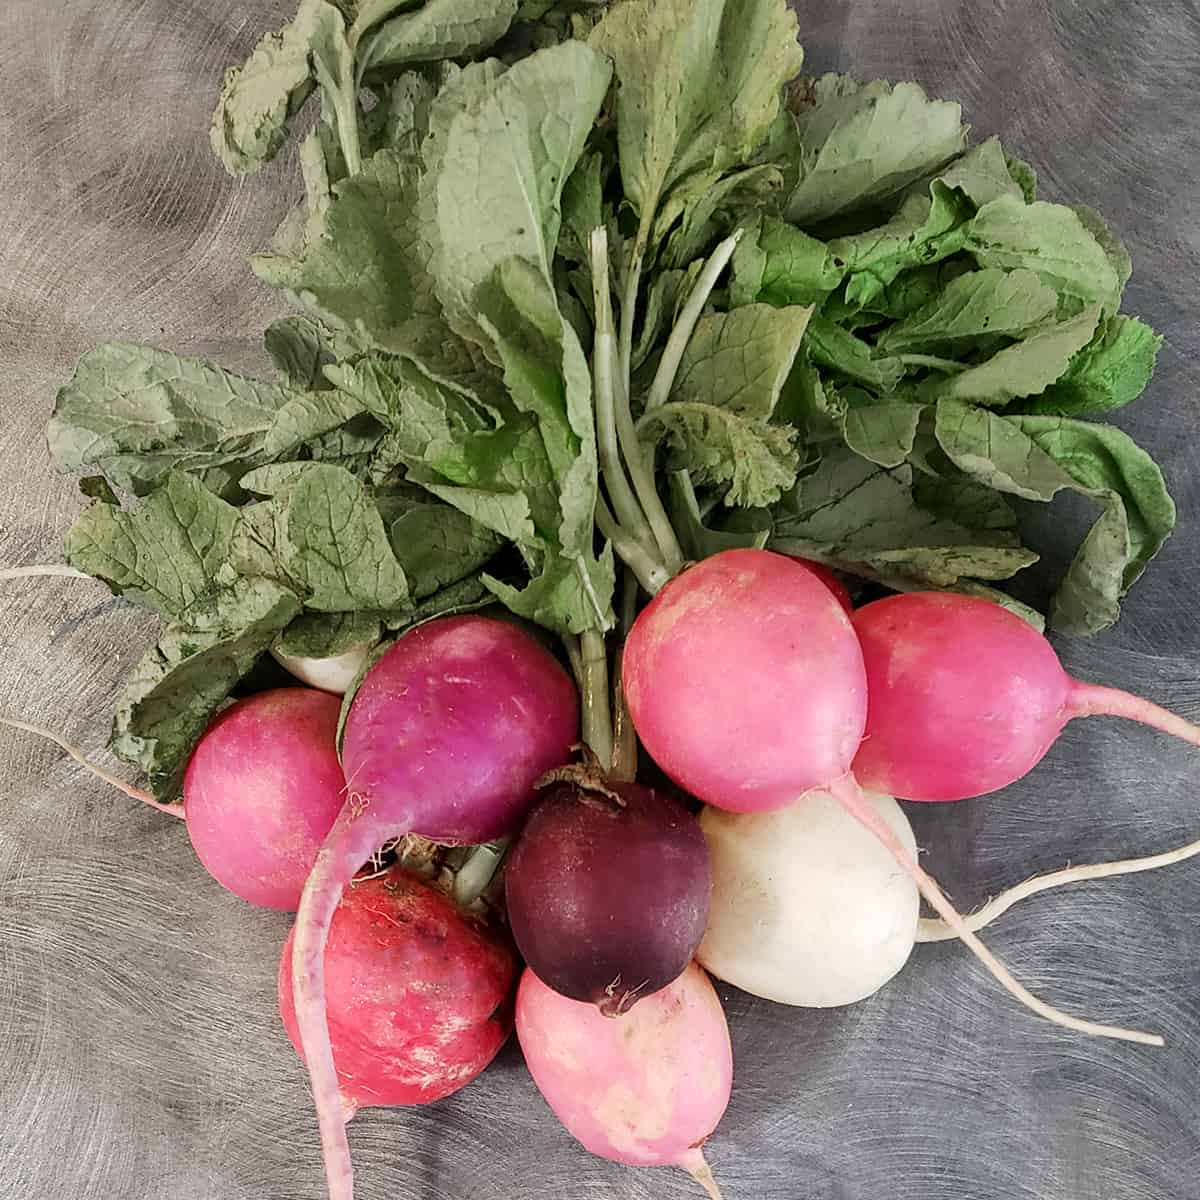 How to Dehydrate Radishes, Greens, and Root